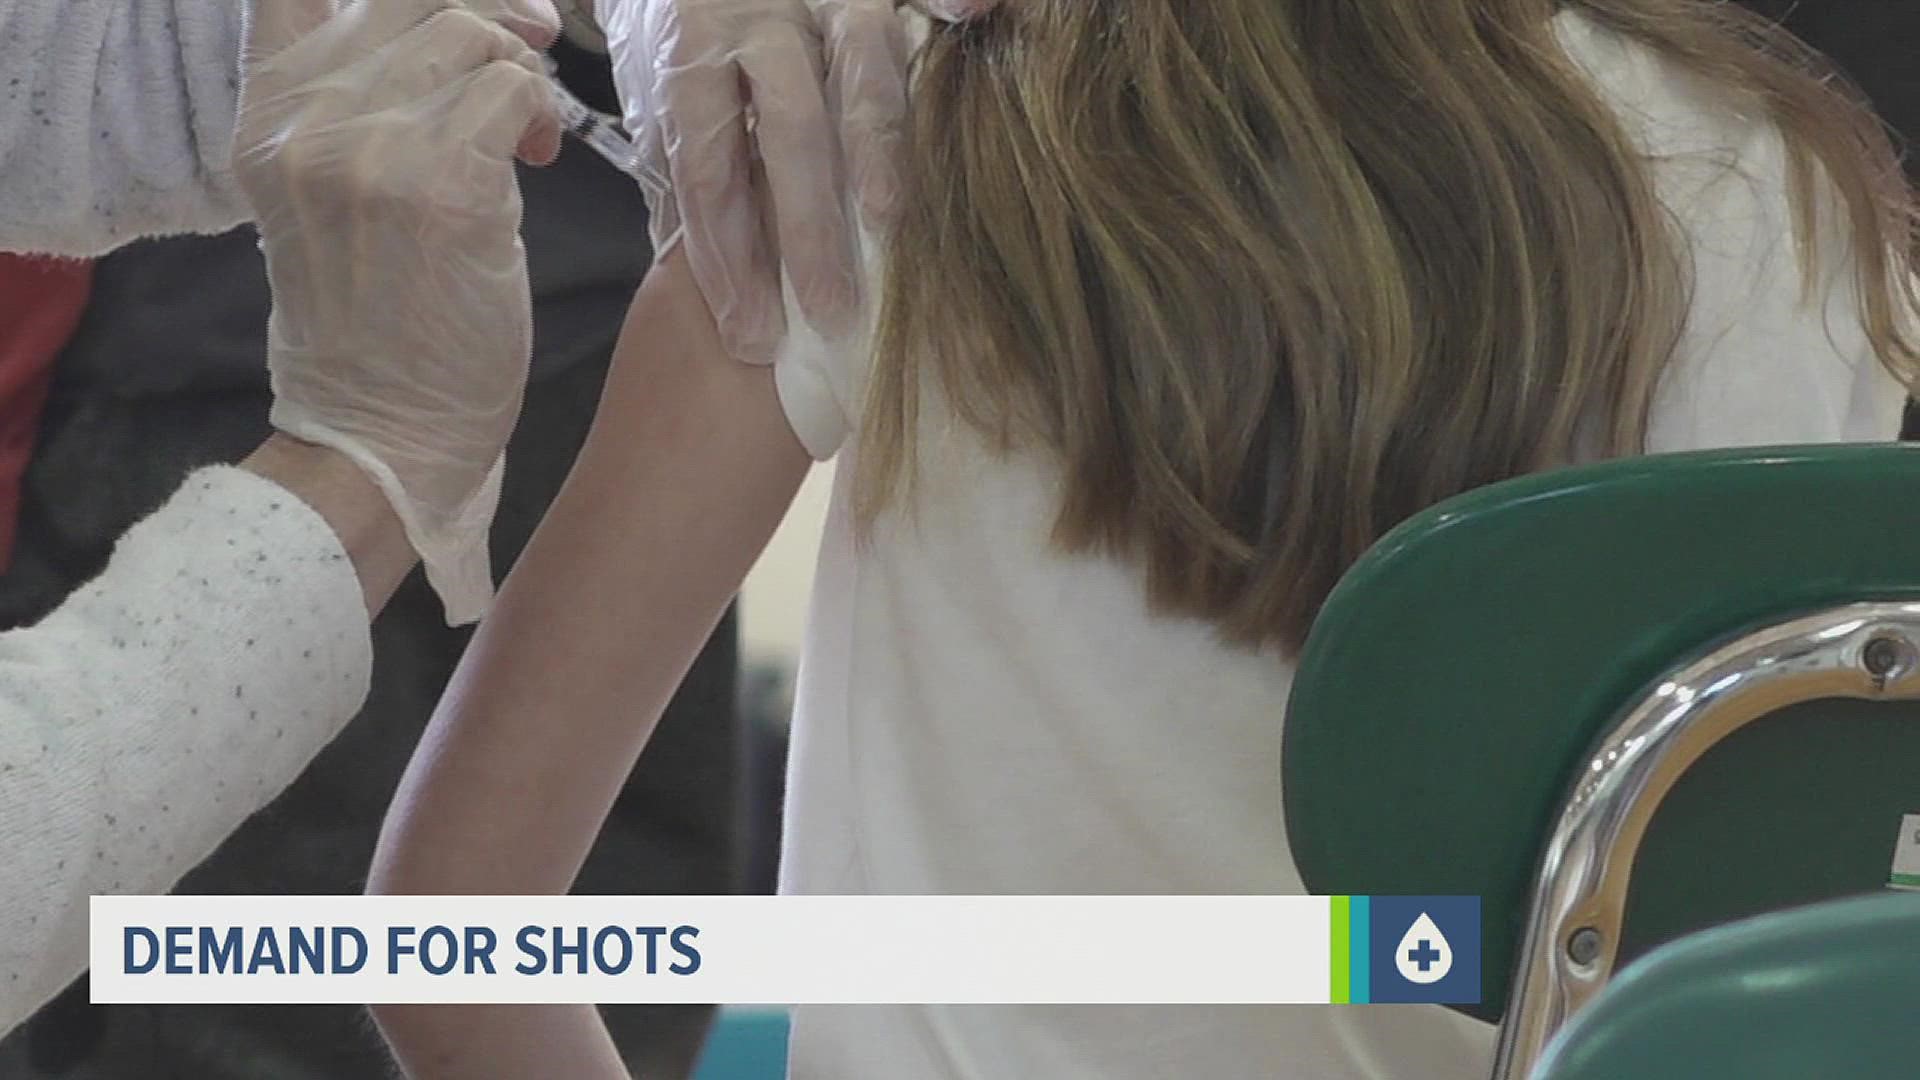 On Sunday, hundreds of families lined up in Derry Township for COVID-19 vaccines